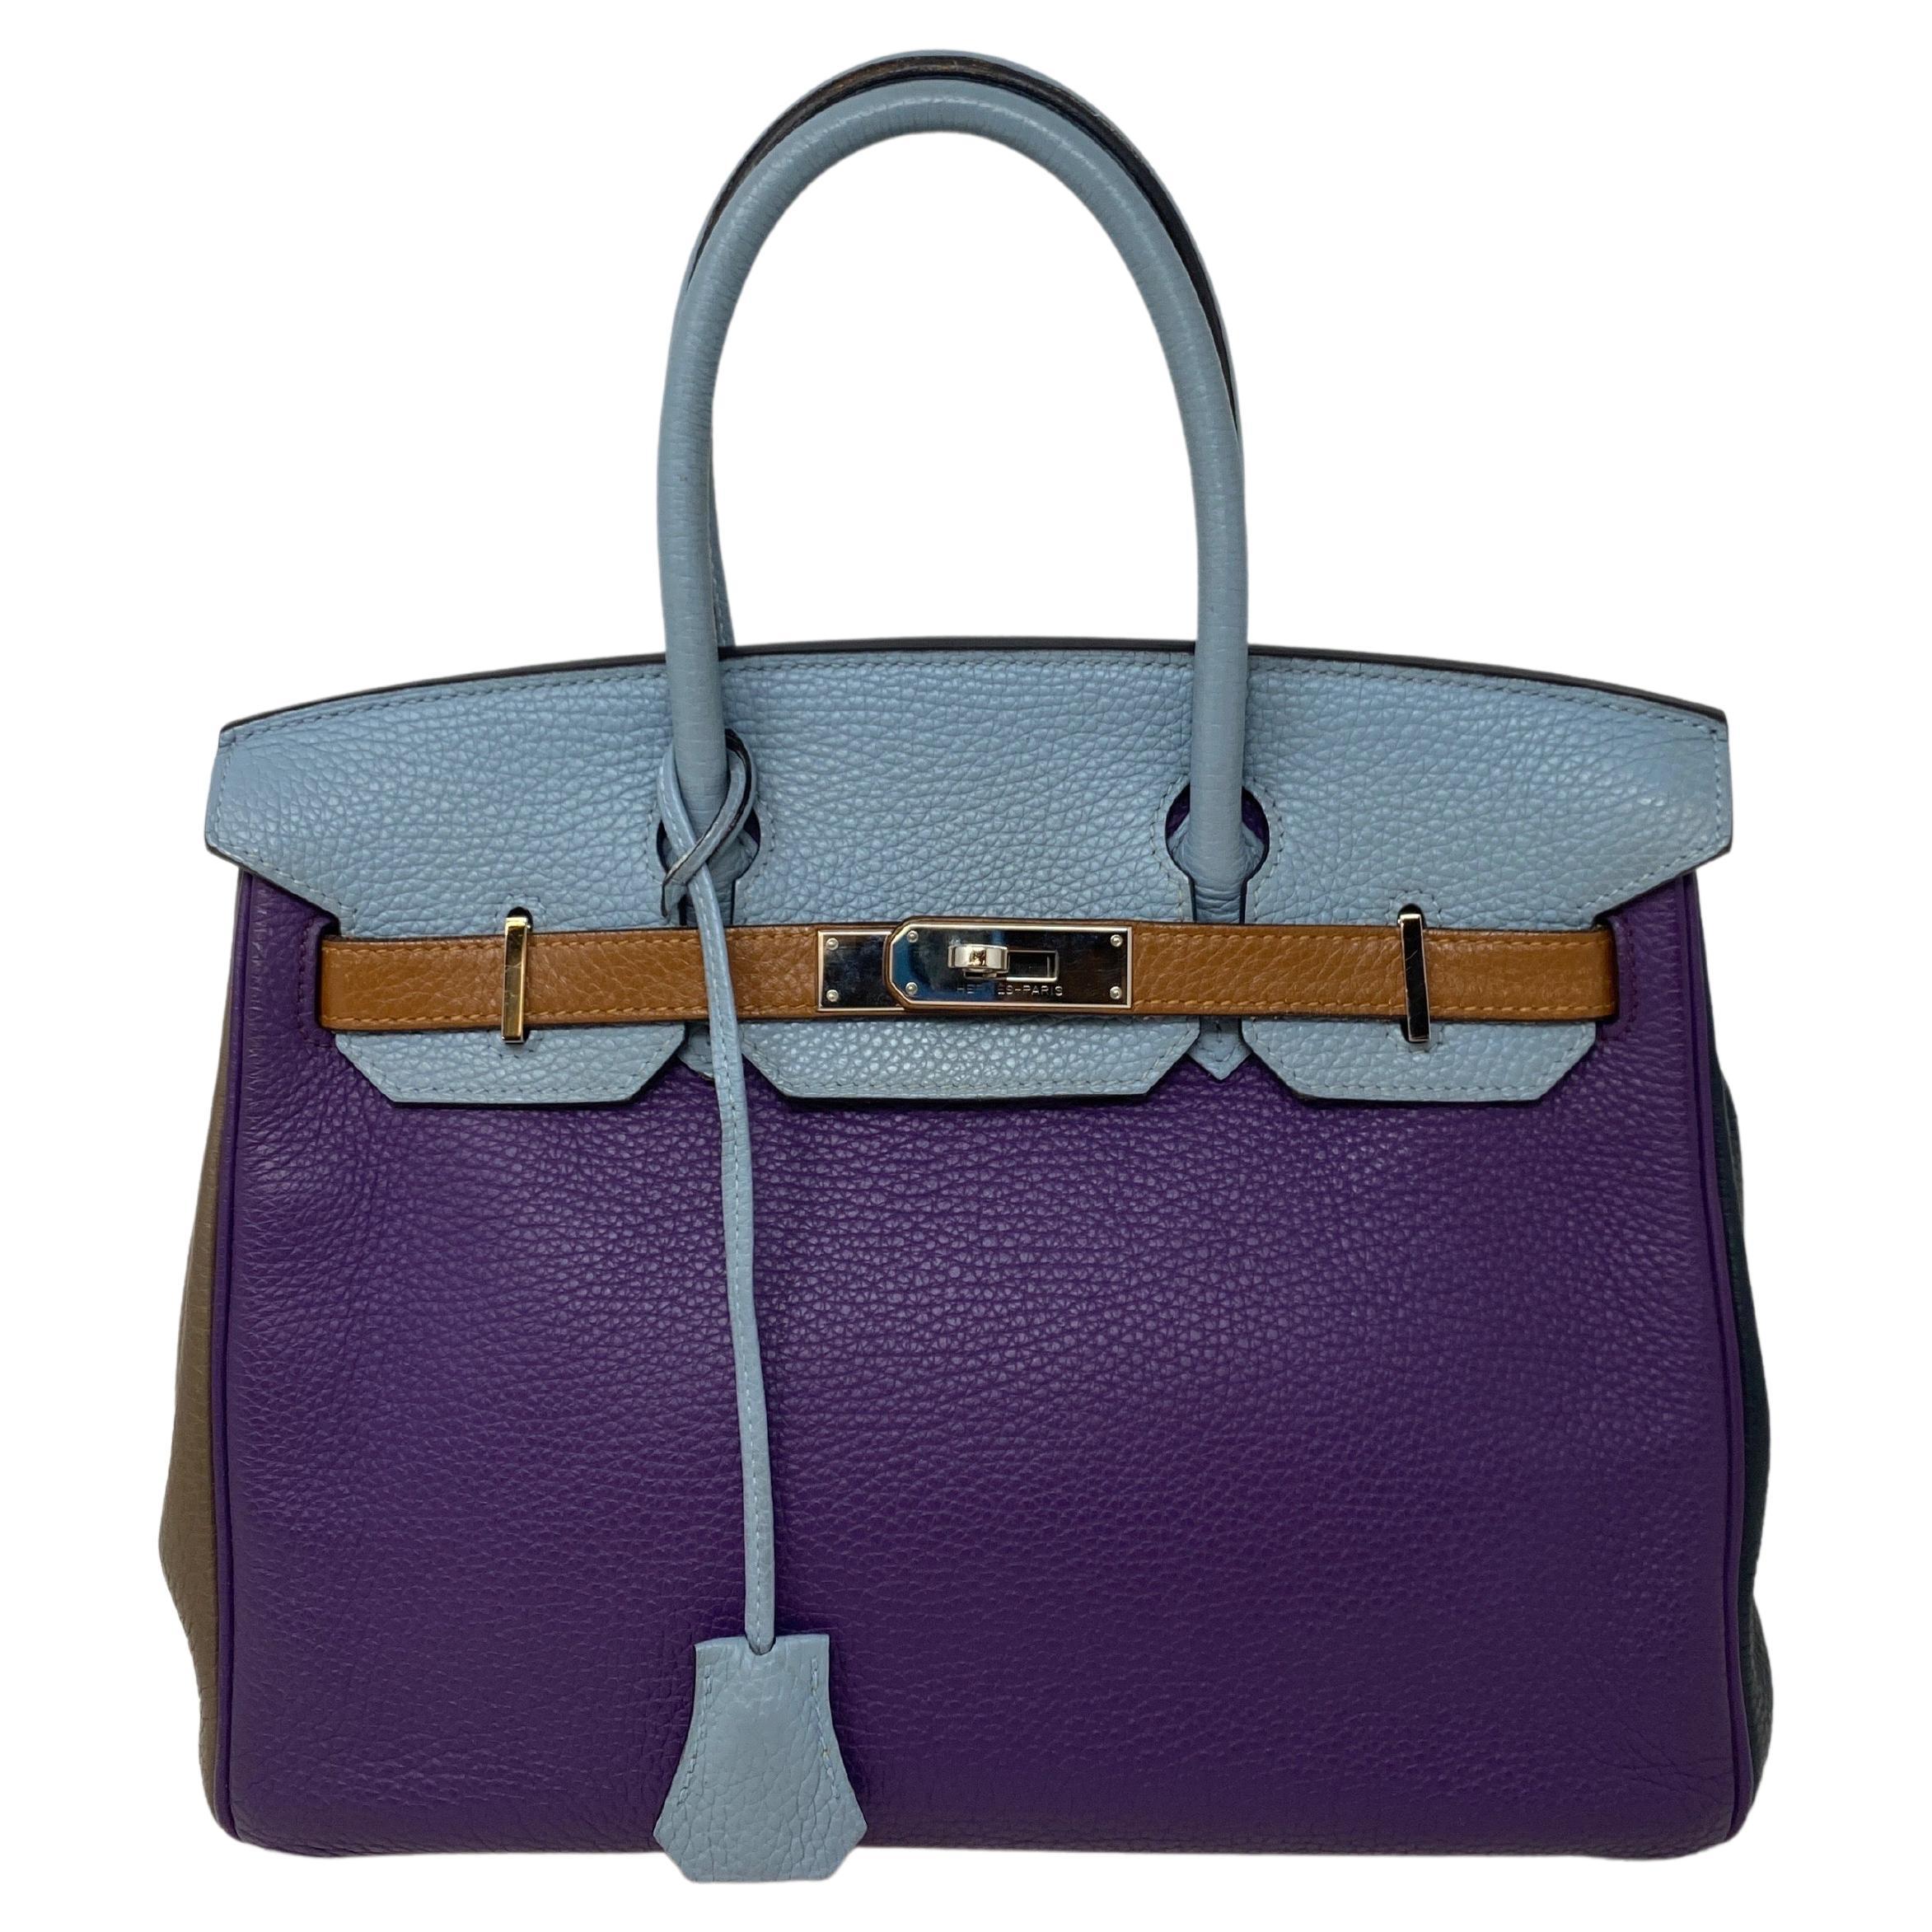 Can I Wear a Bright Colored Birkin or Kelly in the Fall?